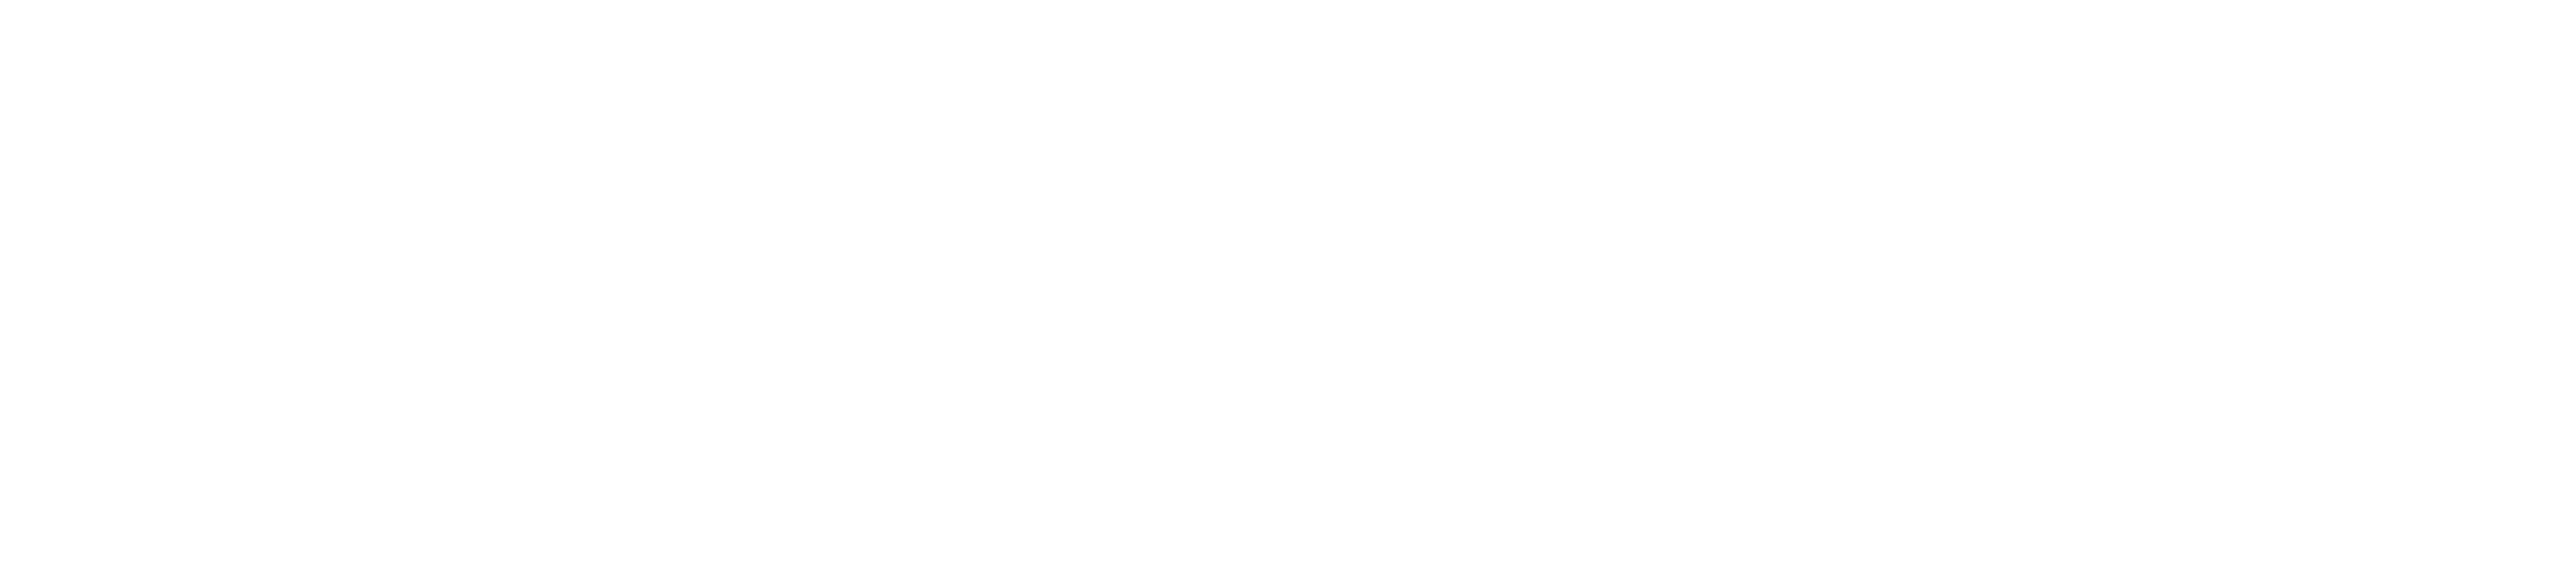 Twitch-Wordmark-White.png